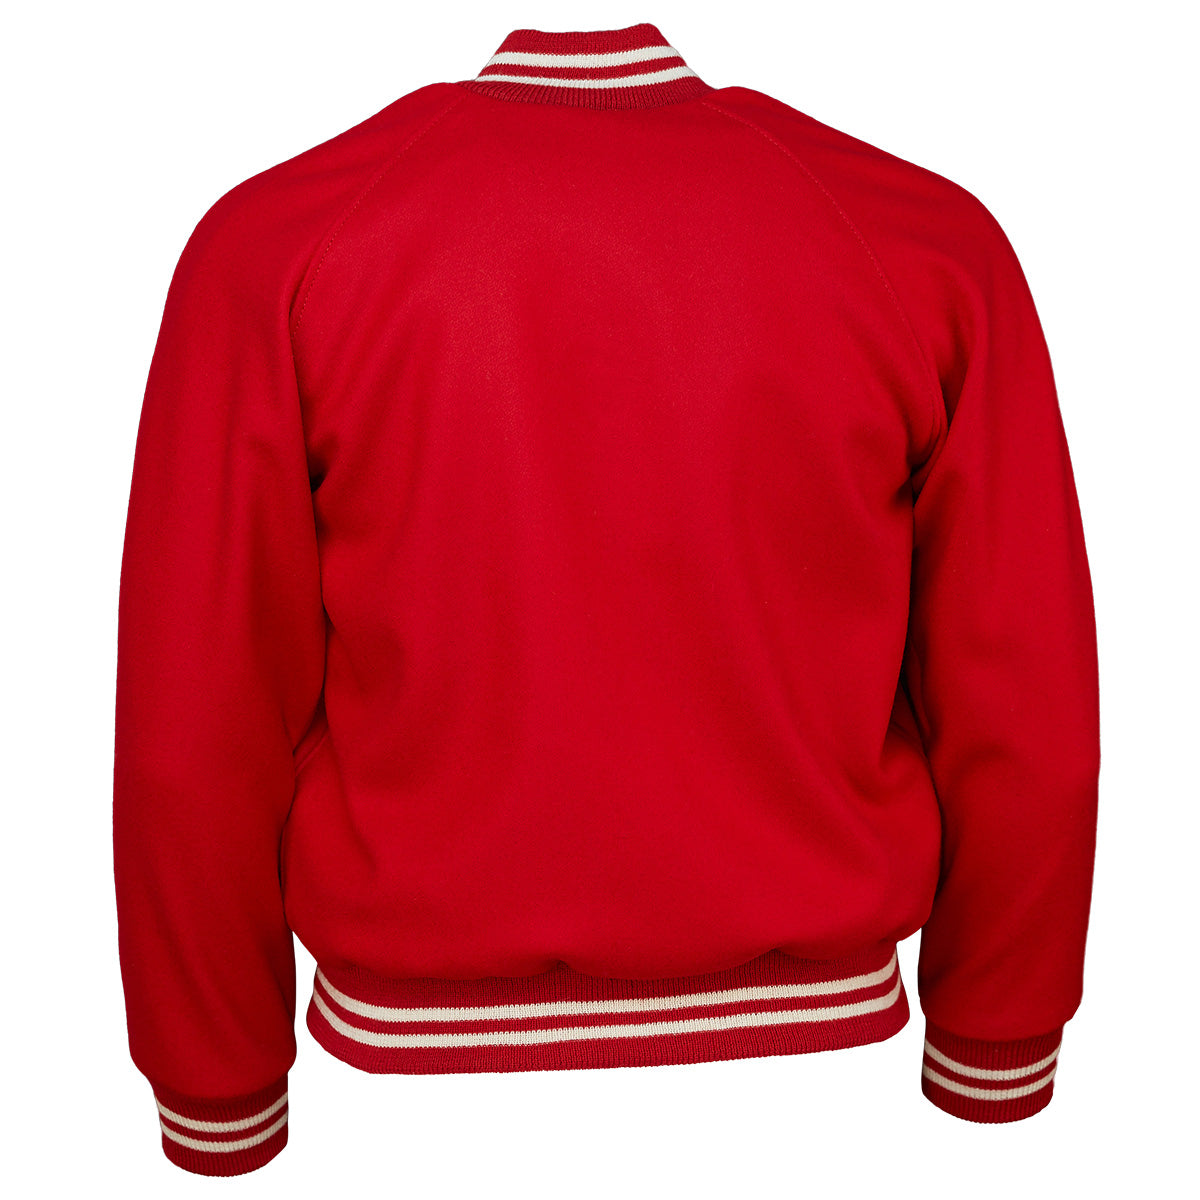 Mexico City Red Devils 1950 Authentic Jacket